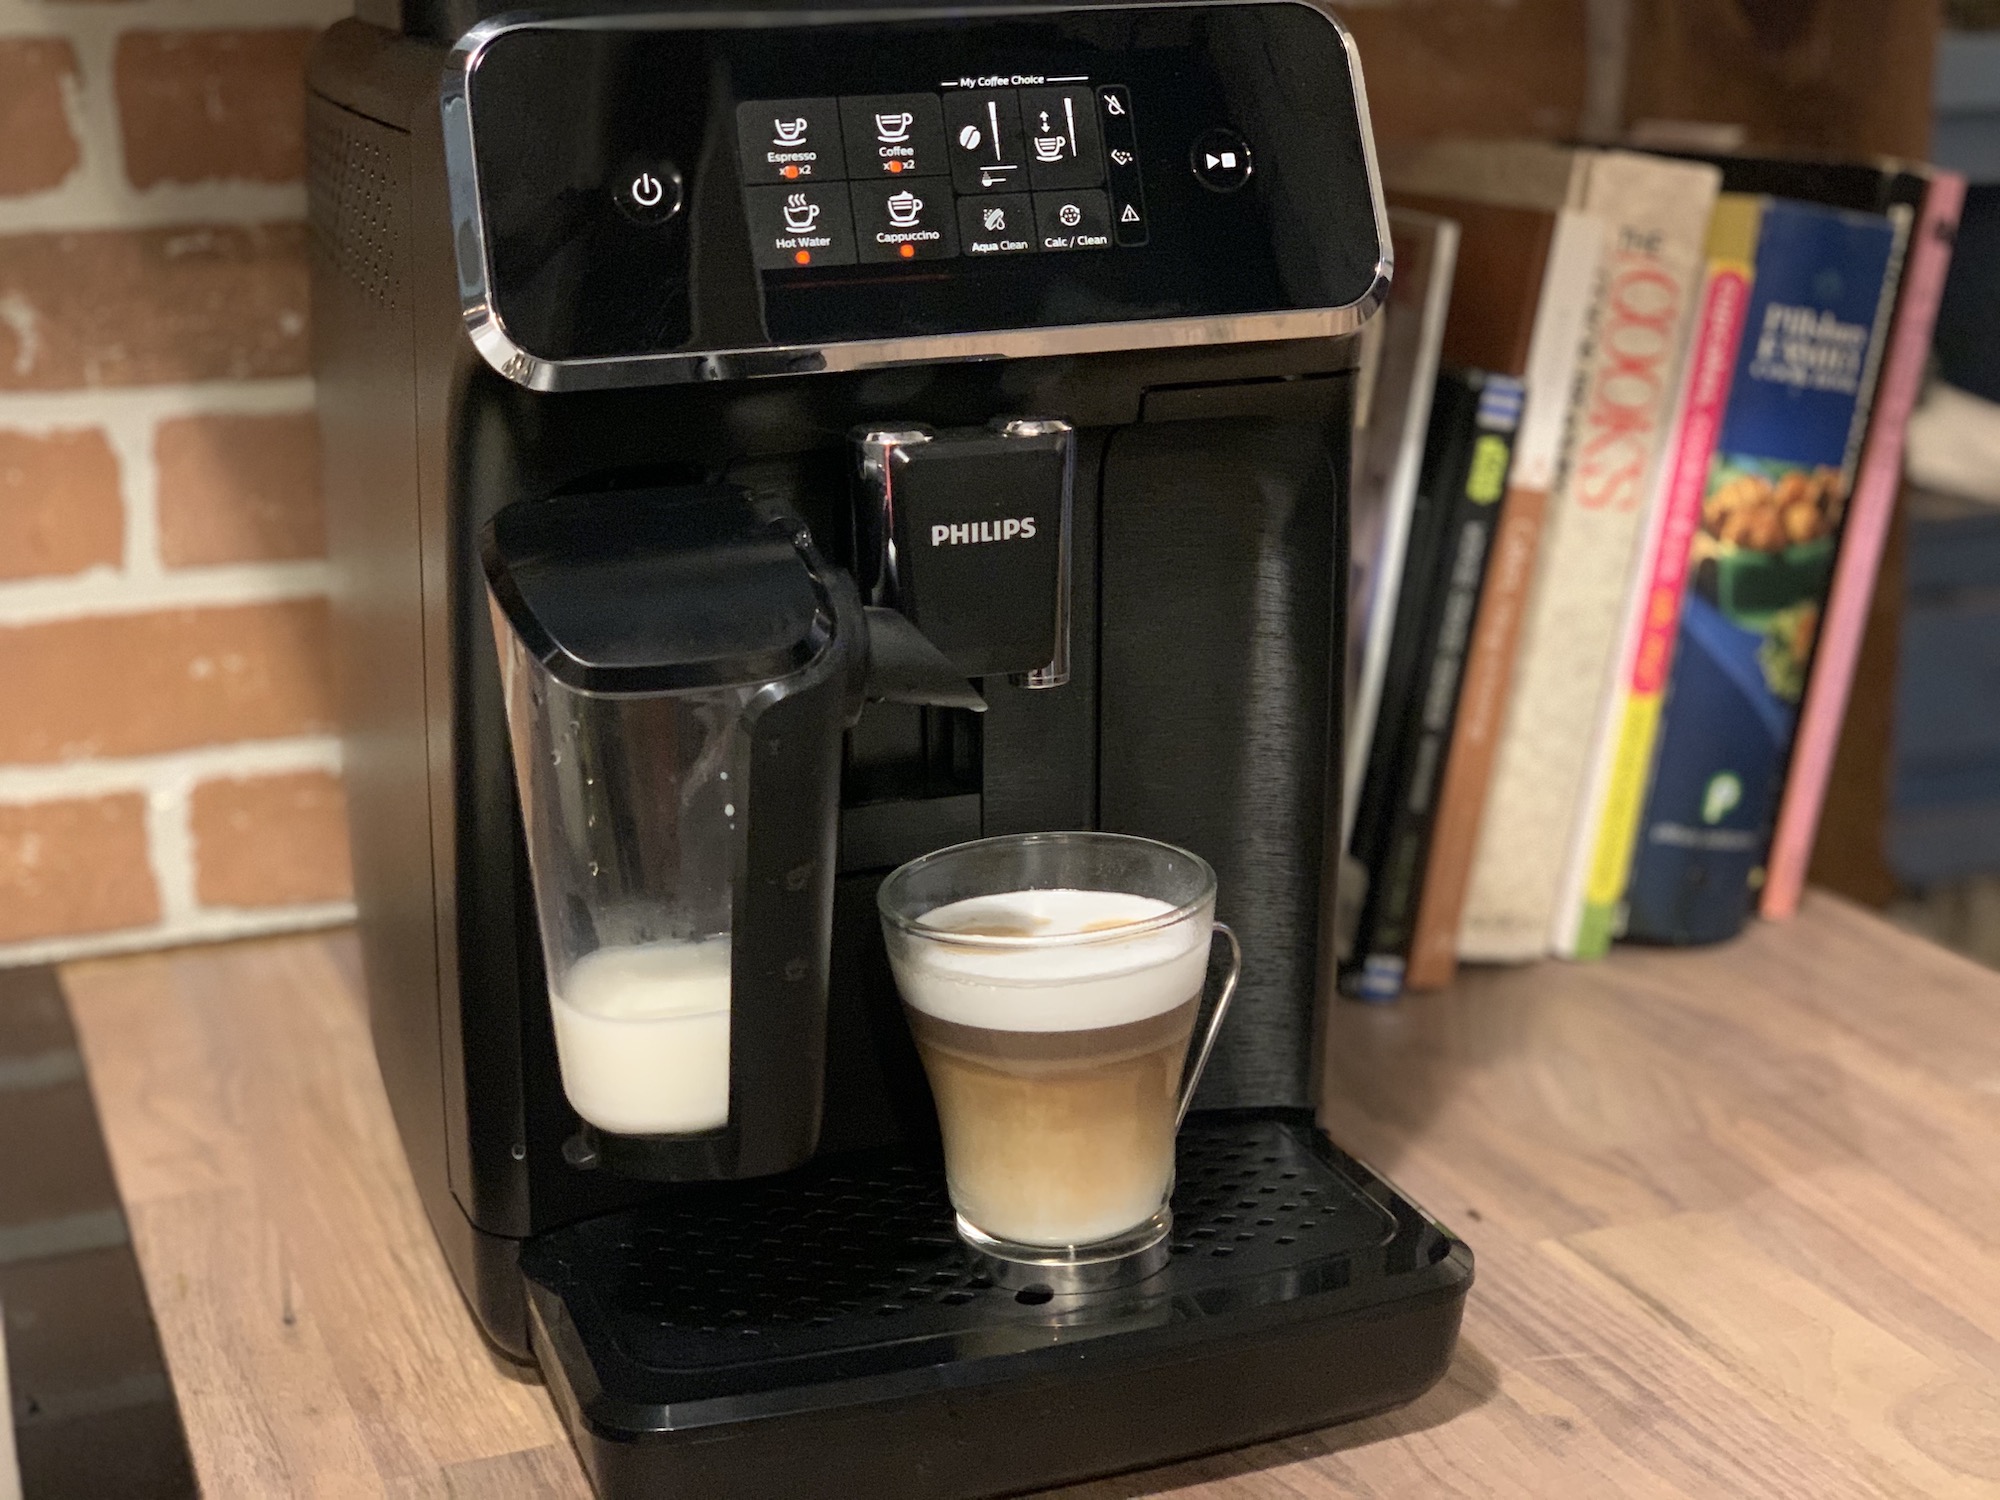 2200 automatic espresso machine with LatteGo milk frother review